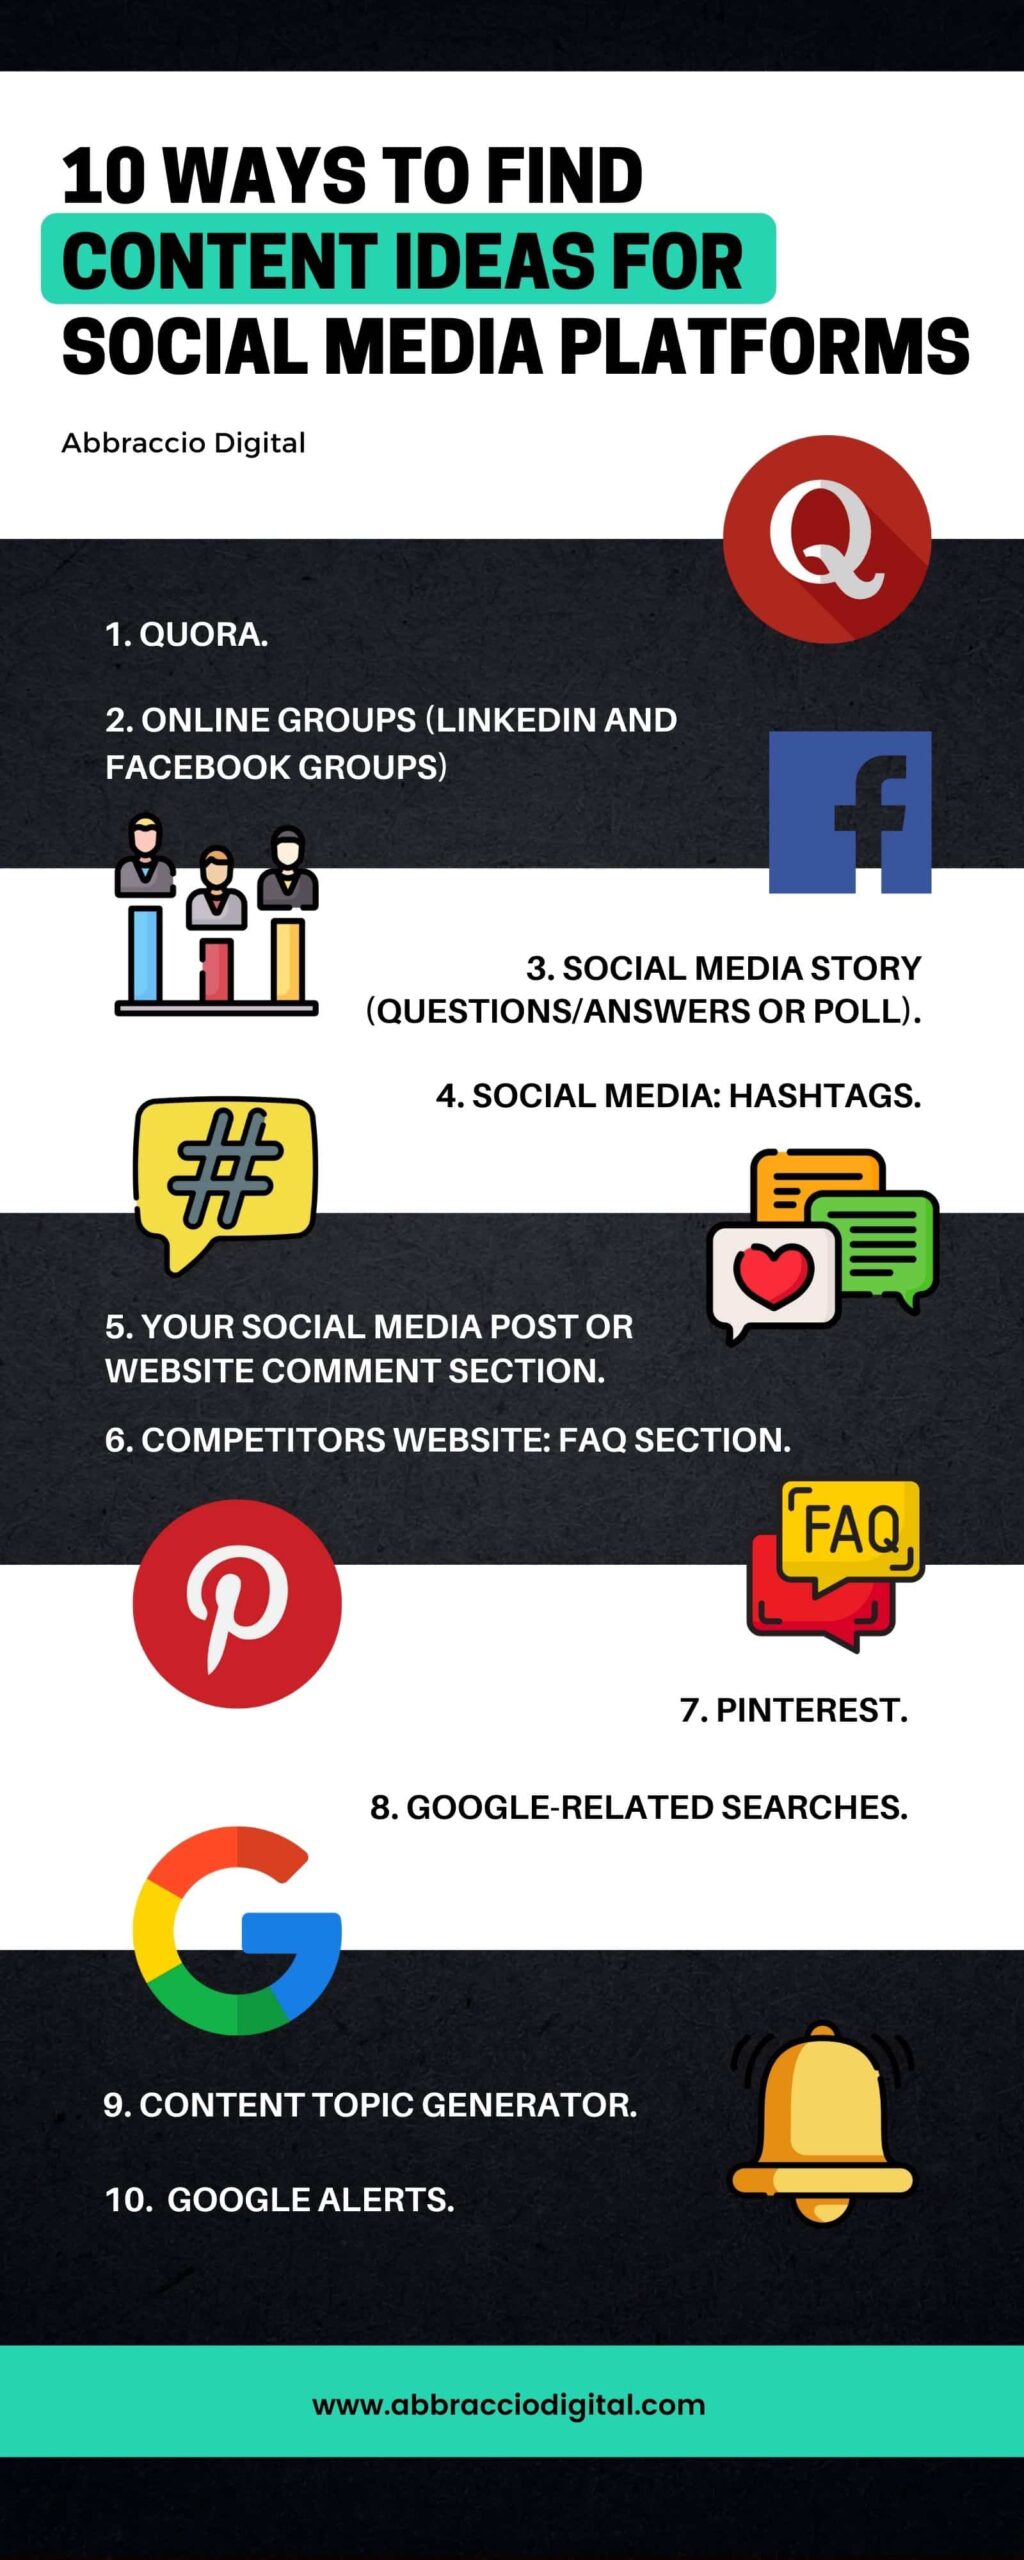 10 ways to find content ideas for social media platforms.